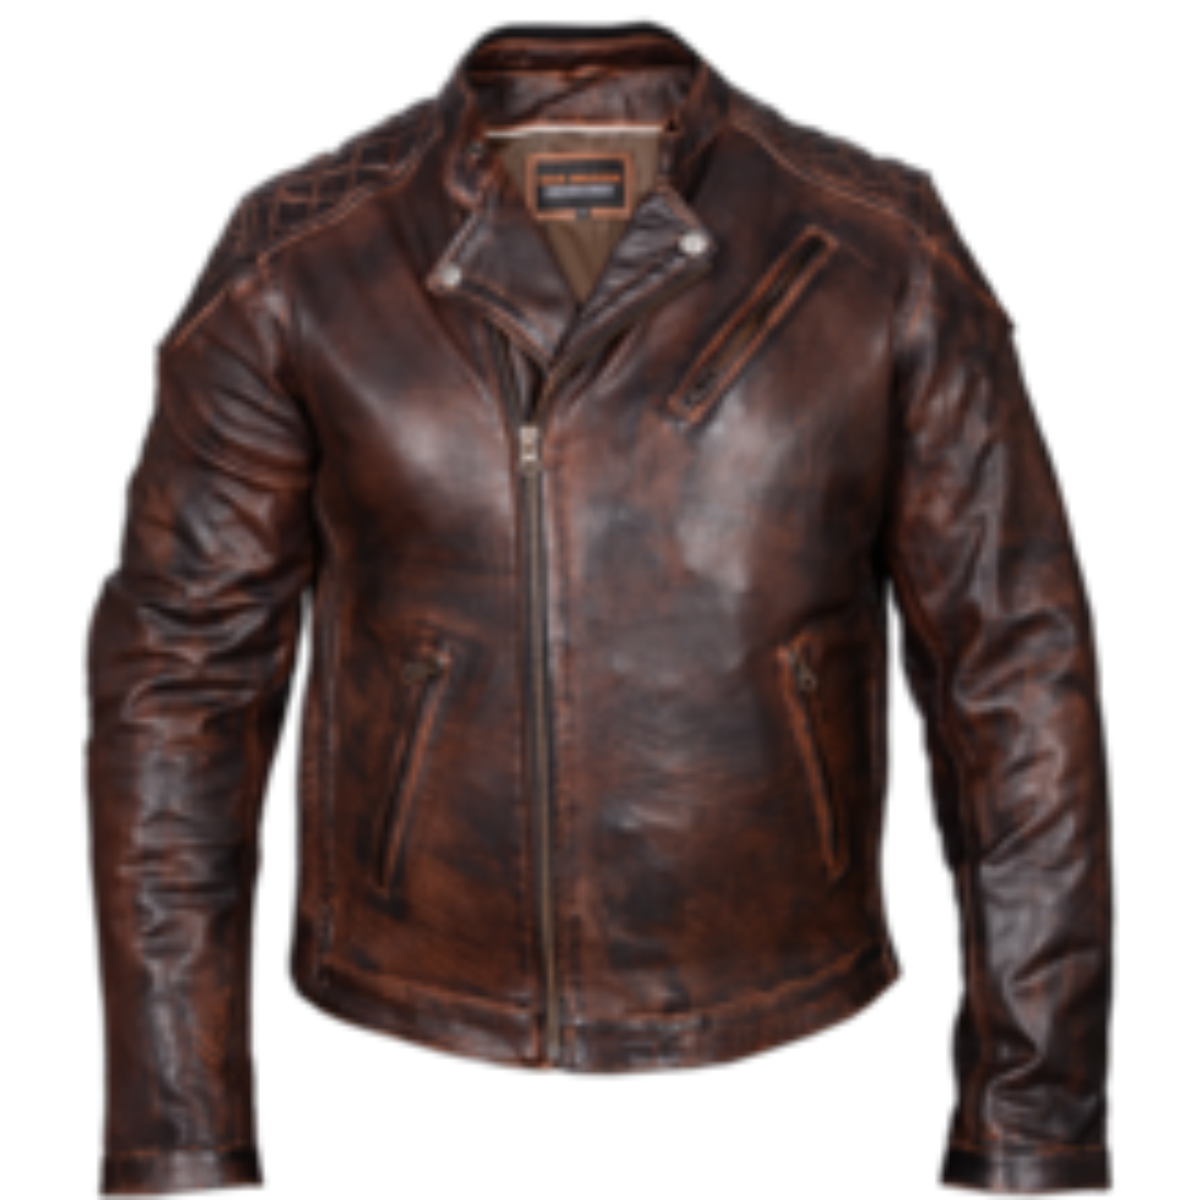 Vance Leather High Mileage Men's Vintage Brown Leather Jacket with Diamond Stitched Shoulders